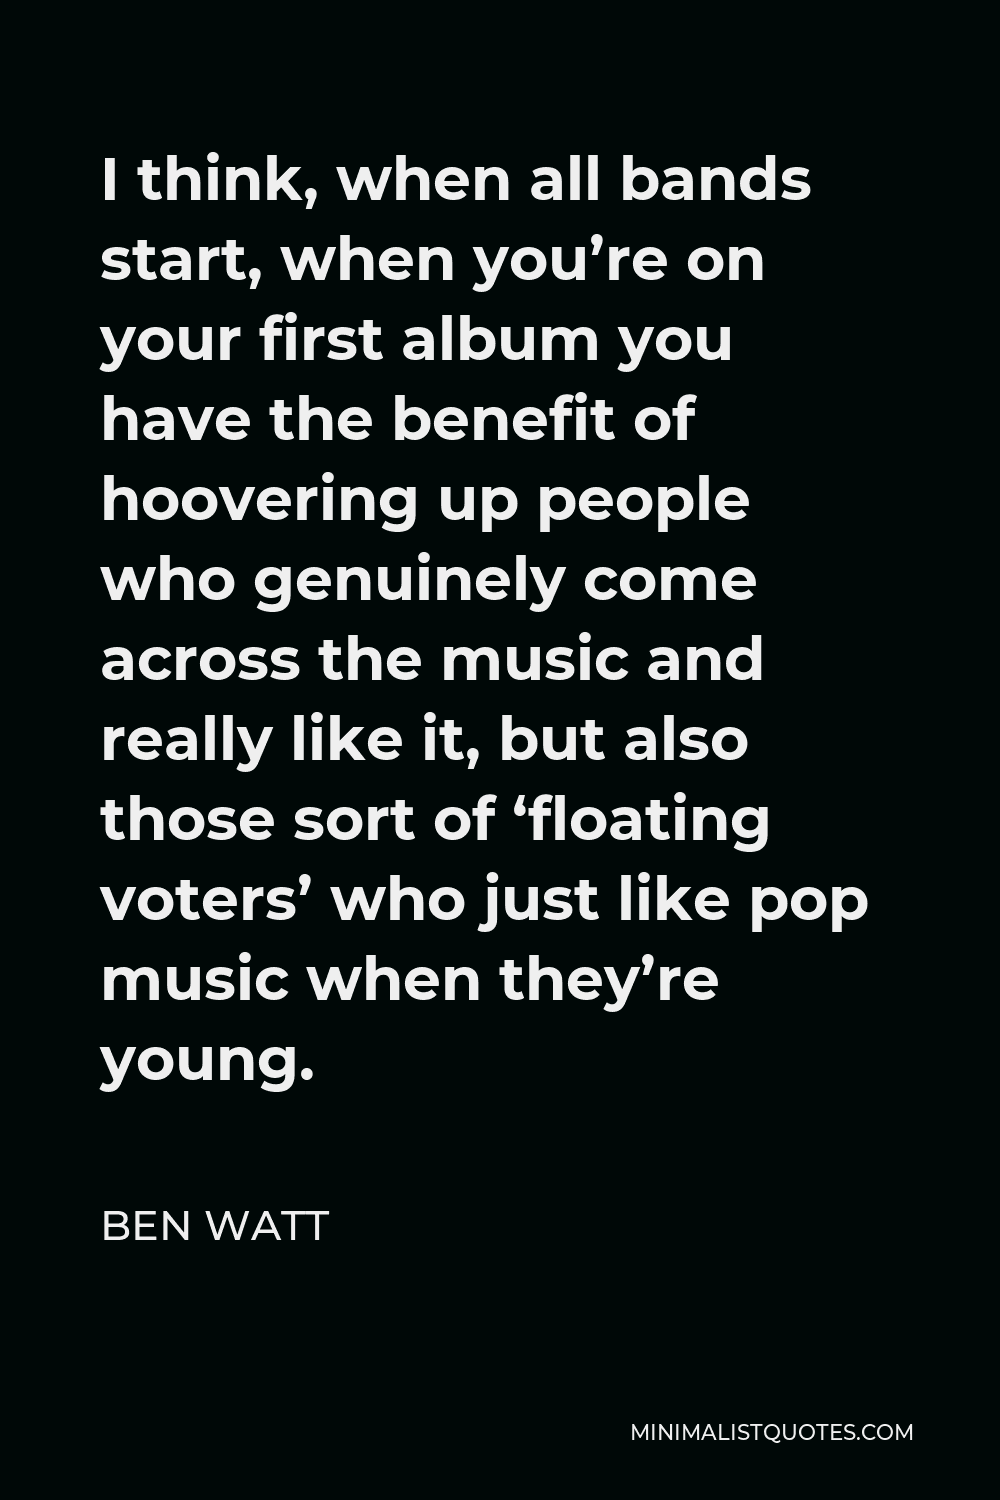 Ben Watt Quote - I think, when all bands start, when you’re on your first album you have the benefit of hoovering up people who genuinely come across the music and really like it, but also those sort of ‘floating voters’ who just like pop music when they’re young.